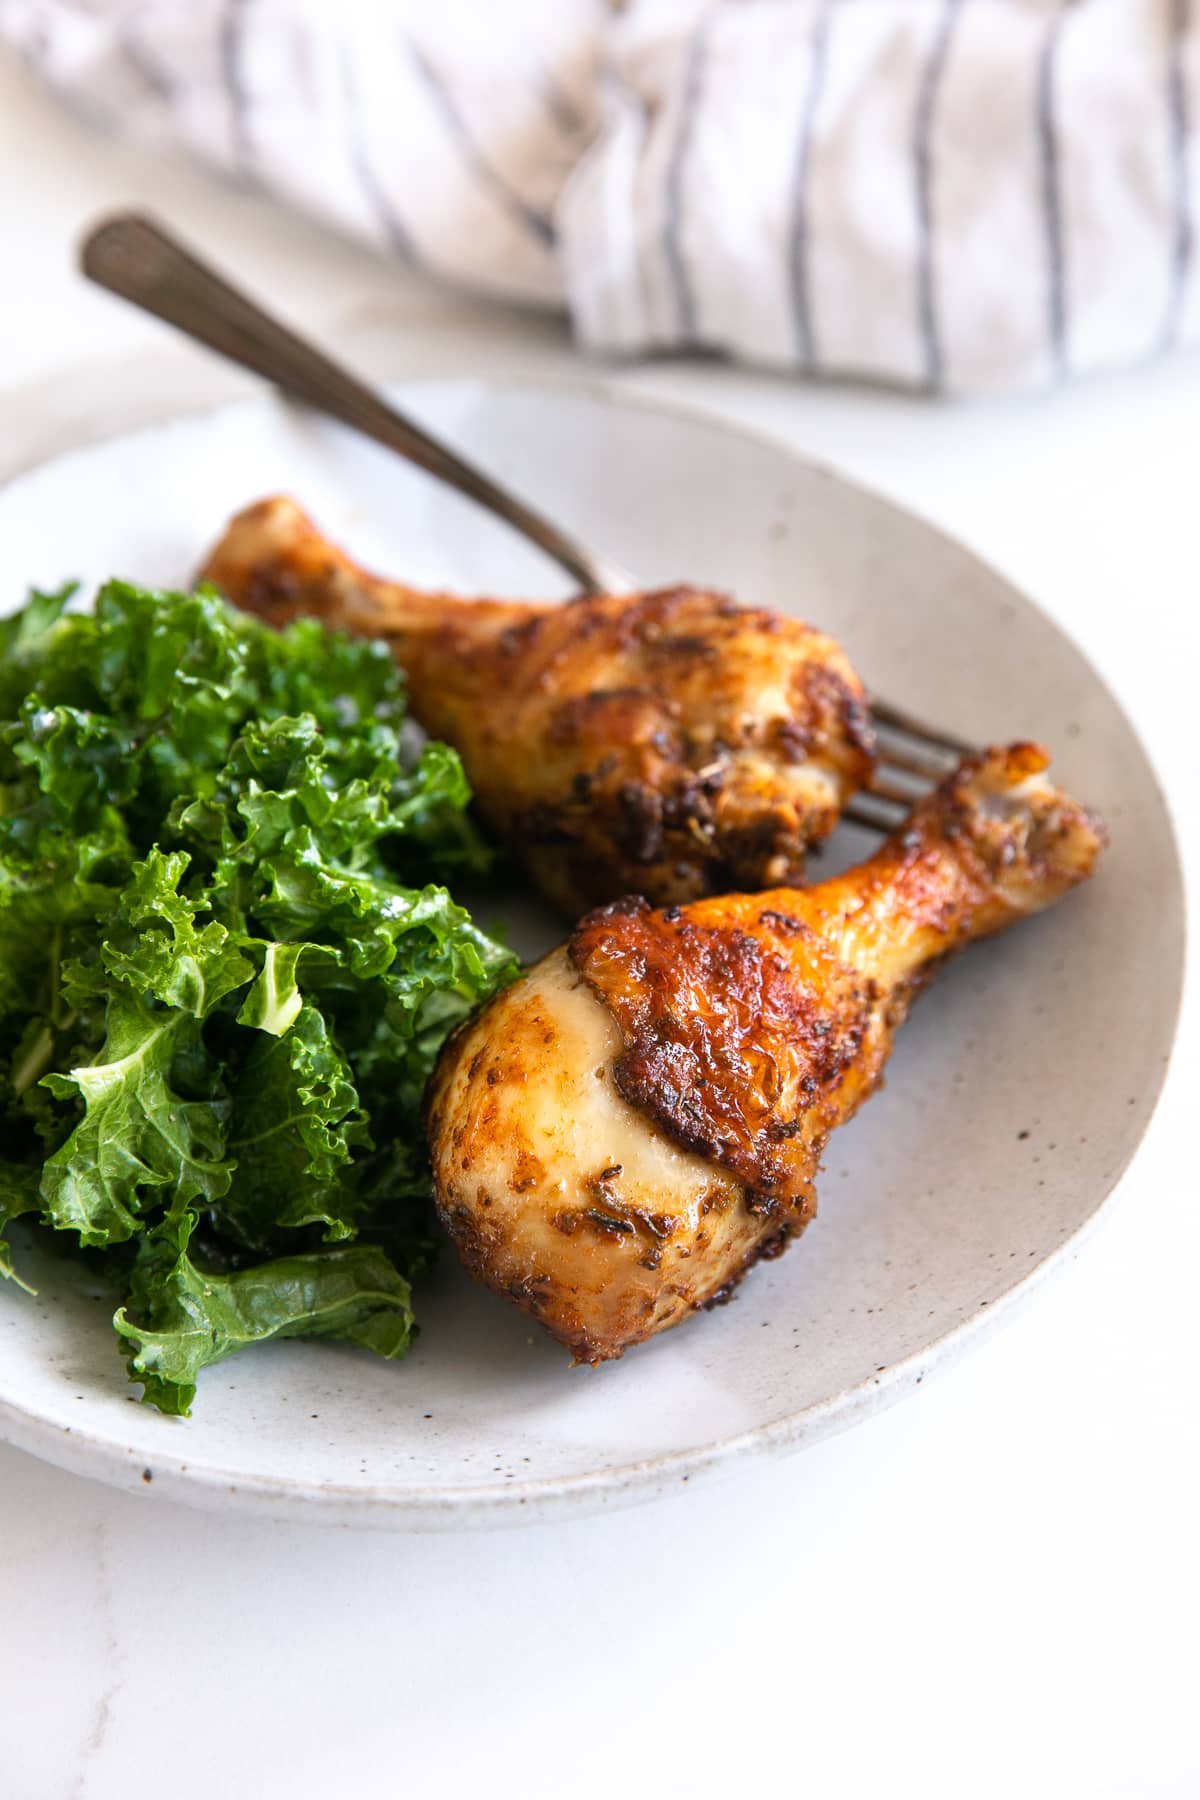 White plate with two chicken legs cooked in the air fryer and a small side of kale salad.